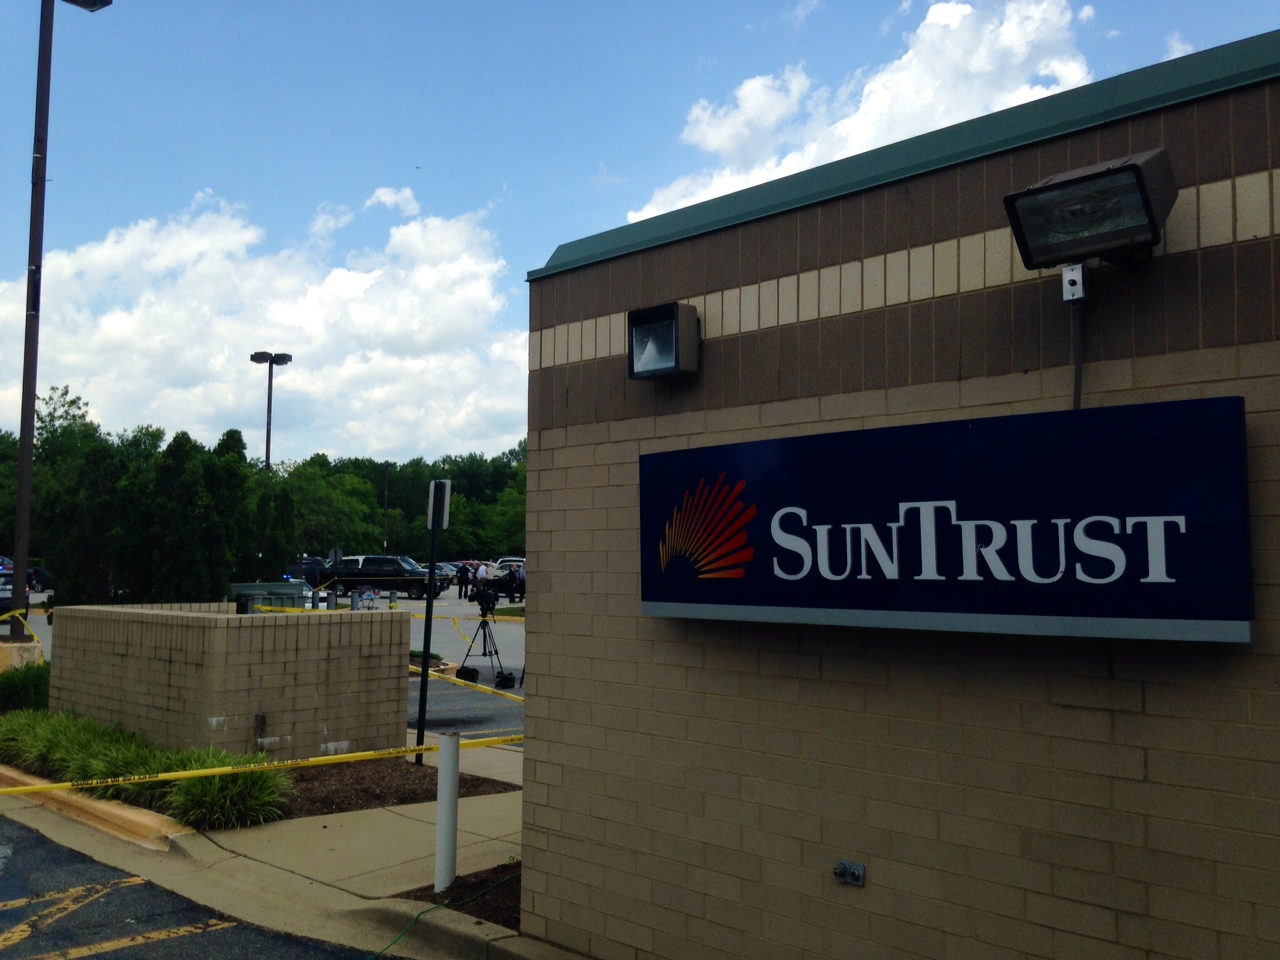 The suspects allegedly stole a vehicle with the intention of robbing the SunTrust bank in Upper Marlboro, according to police. (WTOP/Megan Cloherty)